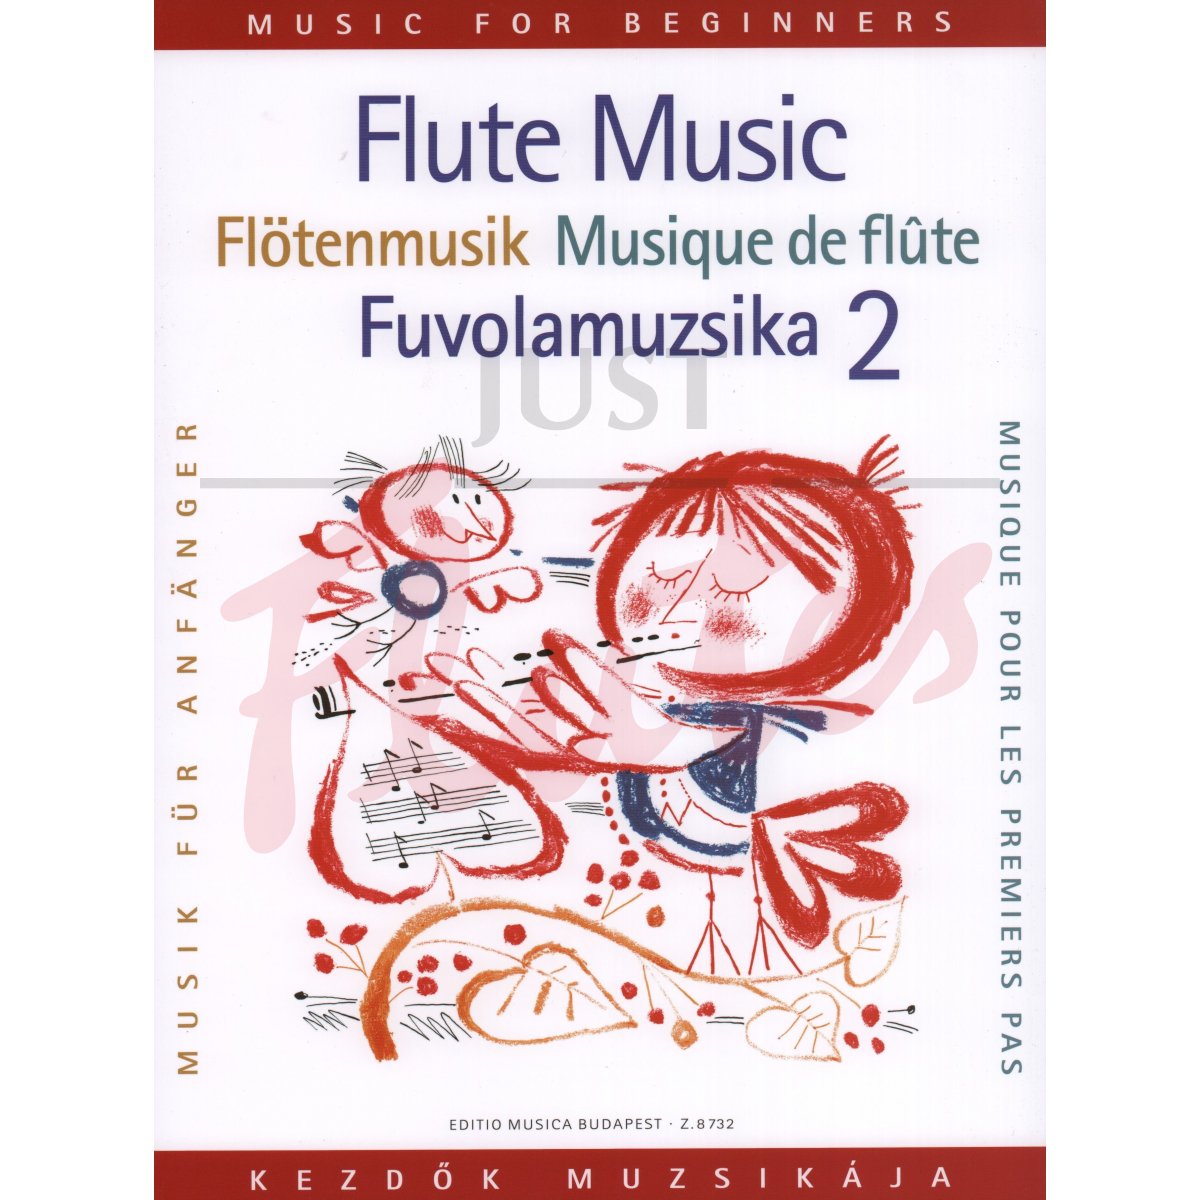 Flute Music for Beginners, Volume 2 with Piano Accompaniment